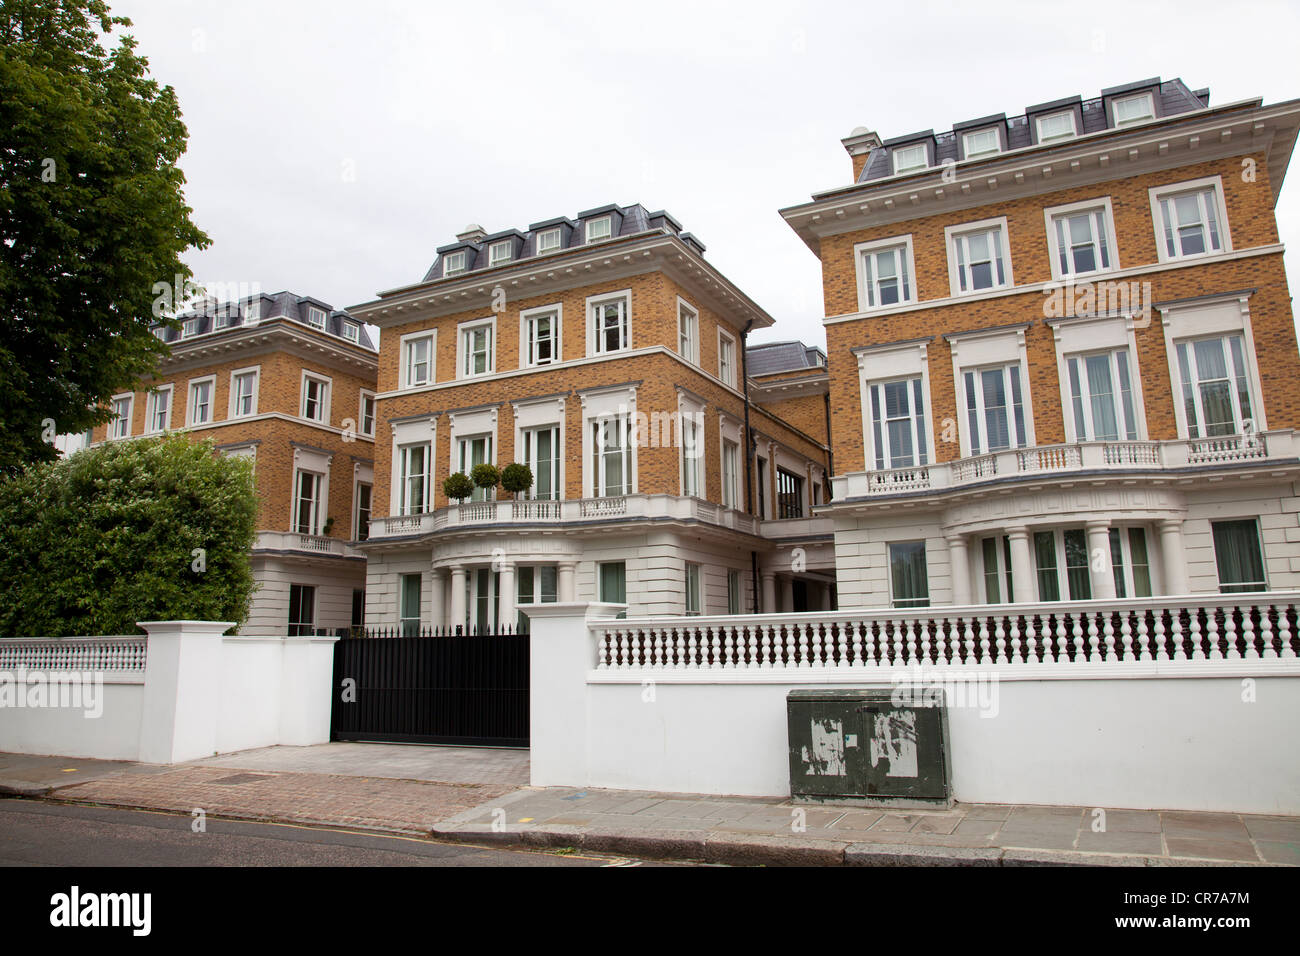 Large houses in the Boltons in London UK Stock Photo